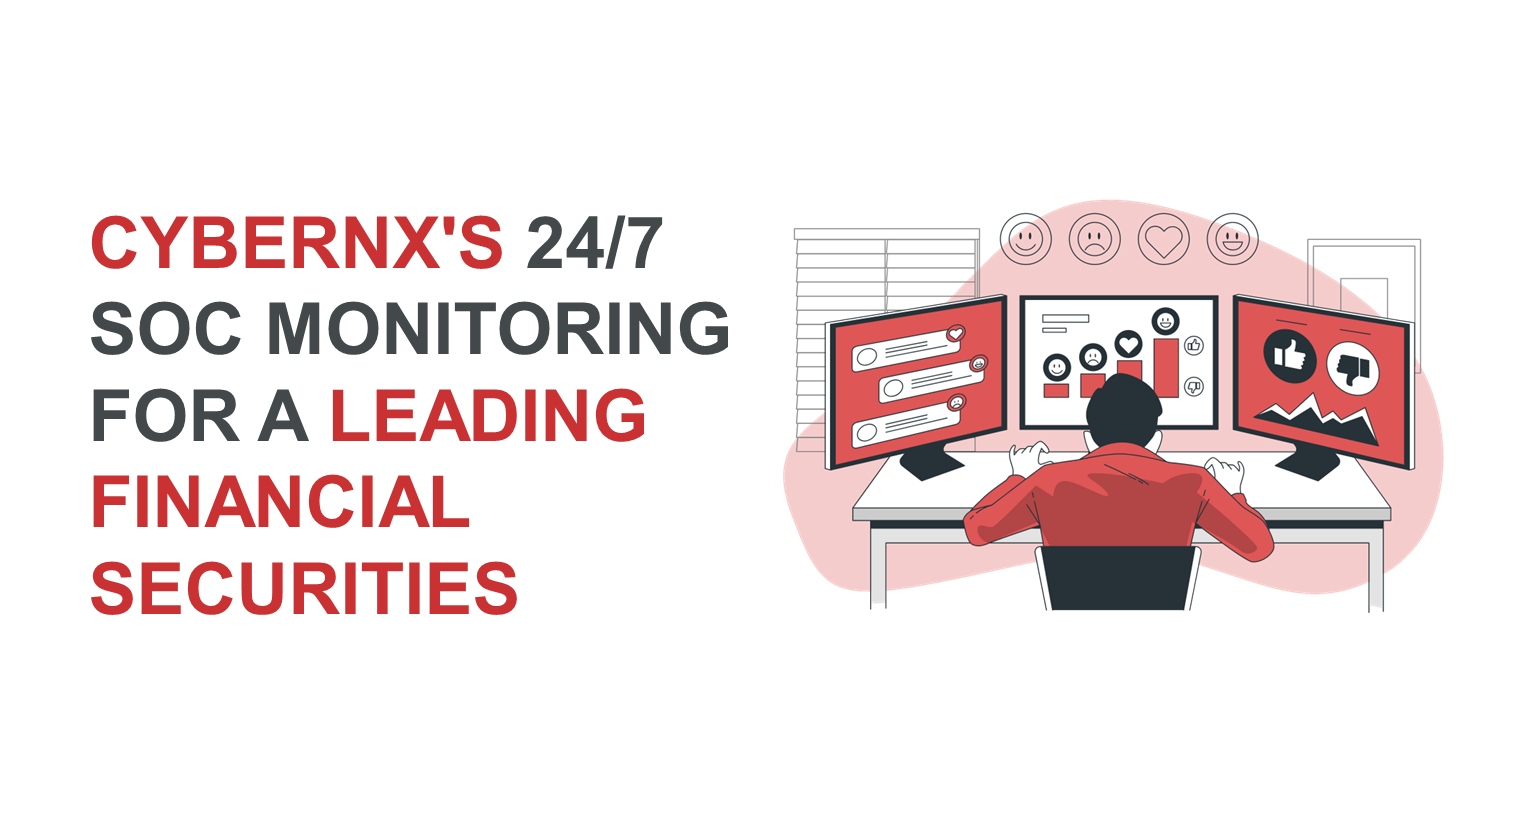 CyberNX's 24/7 SOC Monitoring for a Leading Financial Securities